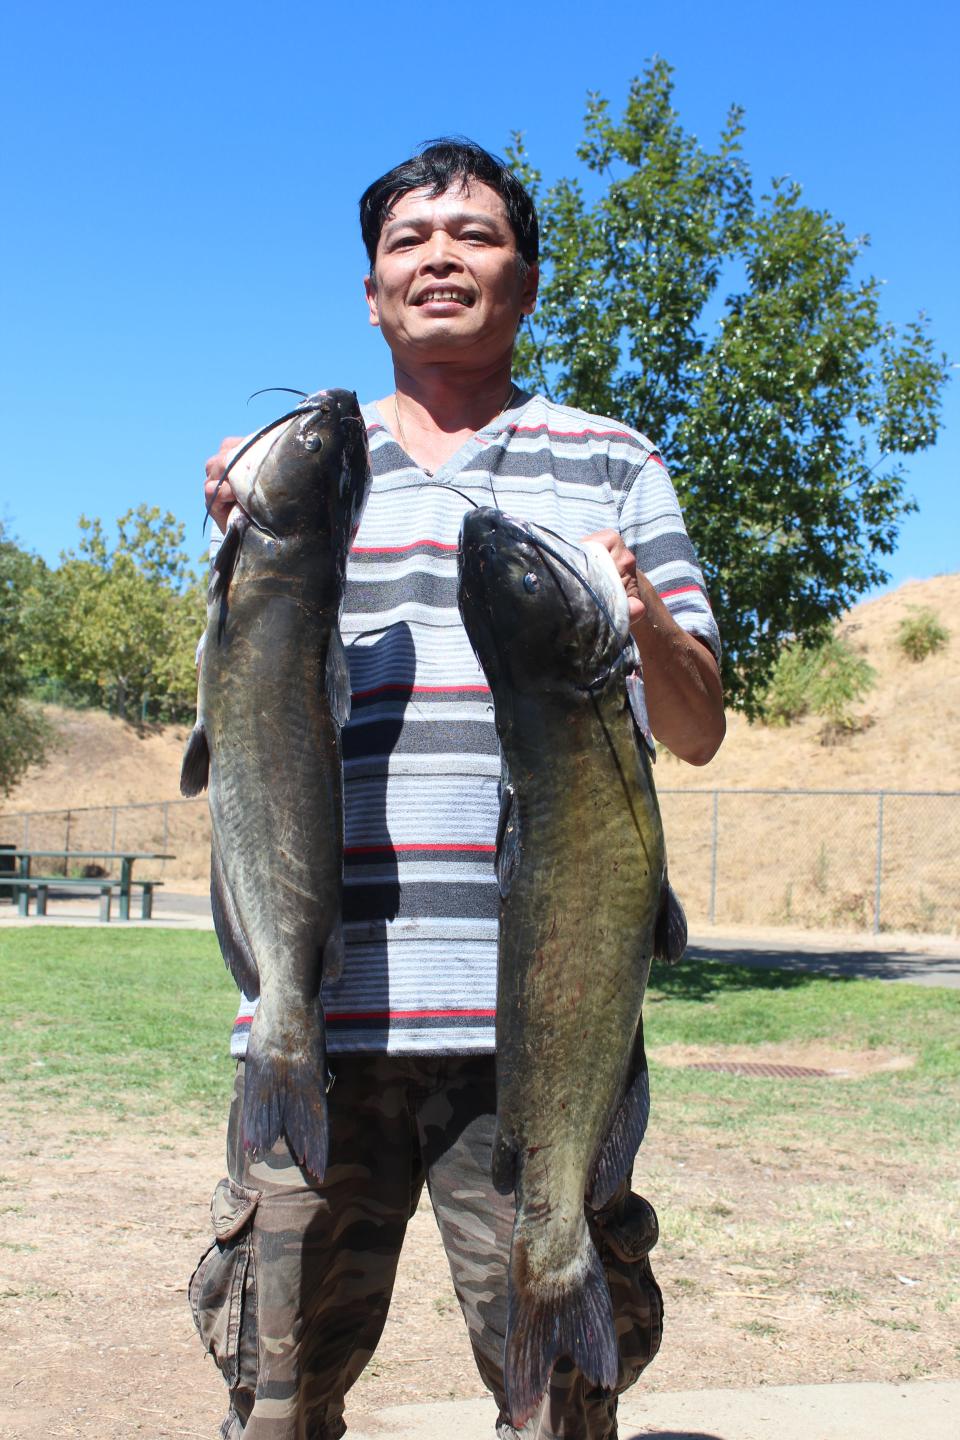 Liem Nguyen of Sacramento landed two channel cats weighing 8 and 9 pounds while using squid at Granite Regional Park in Sacramento on Sept. 3.